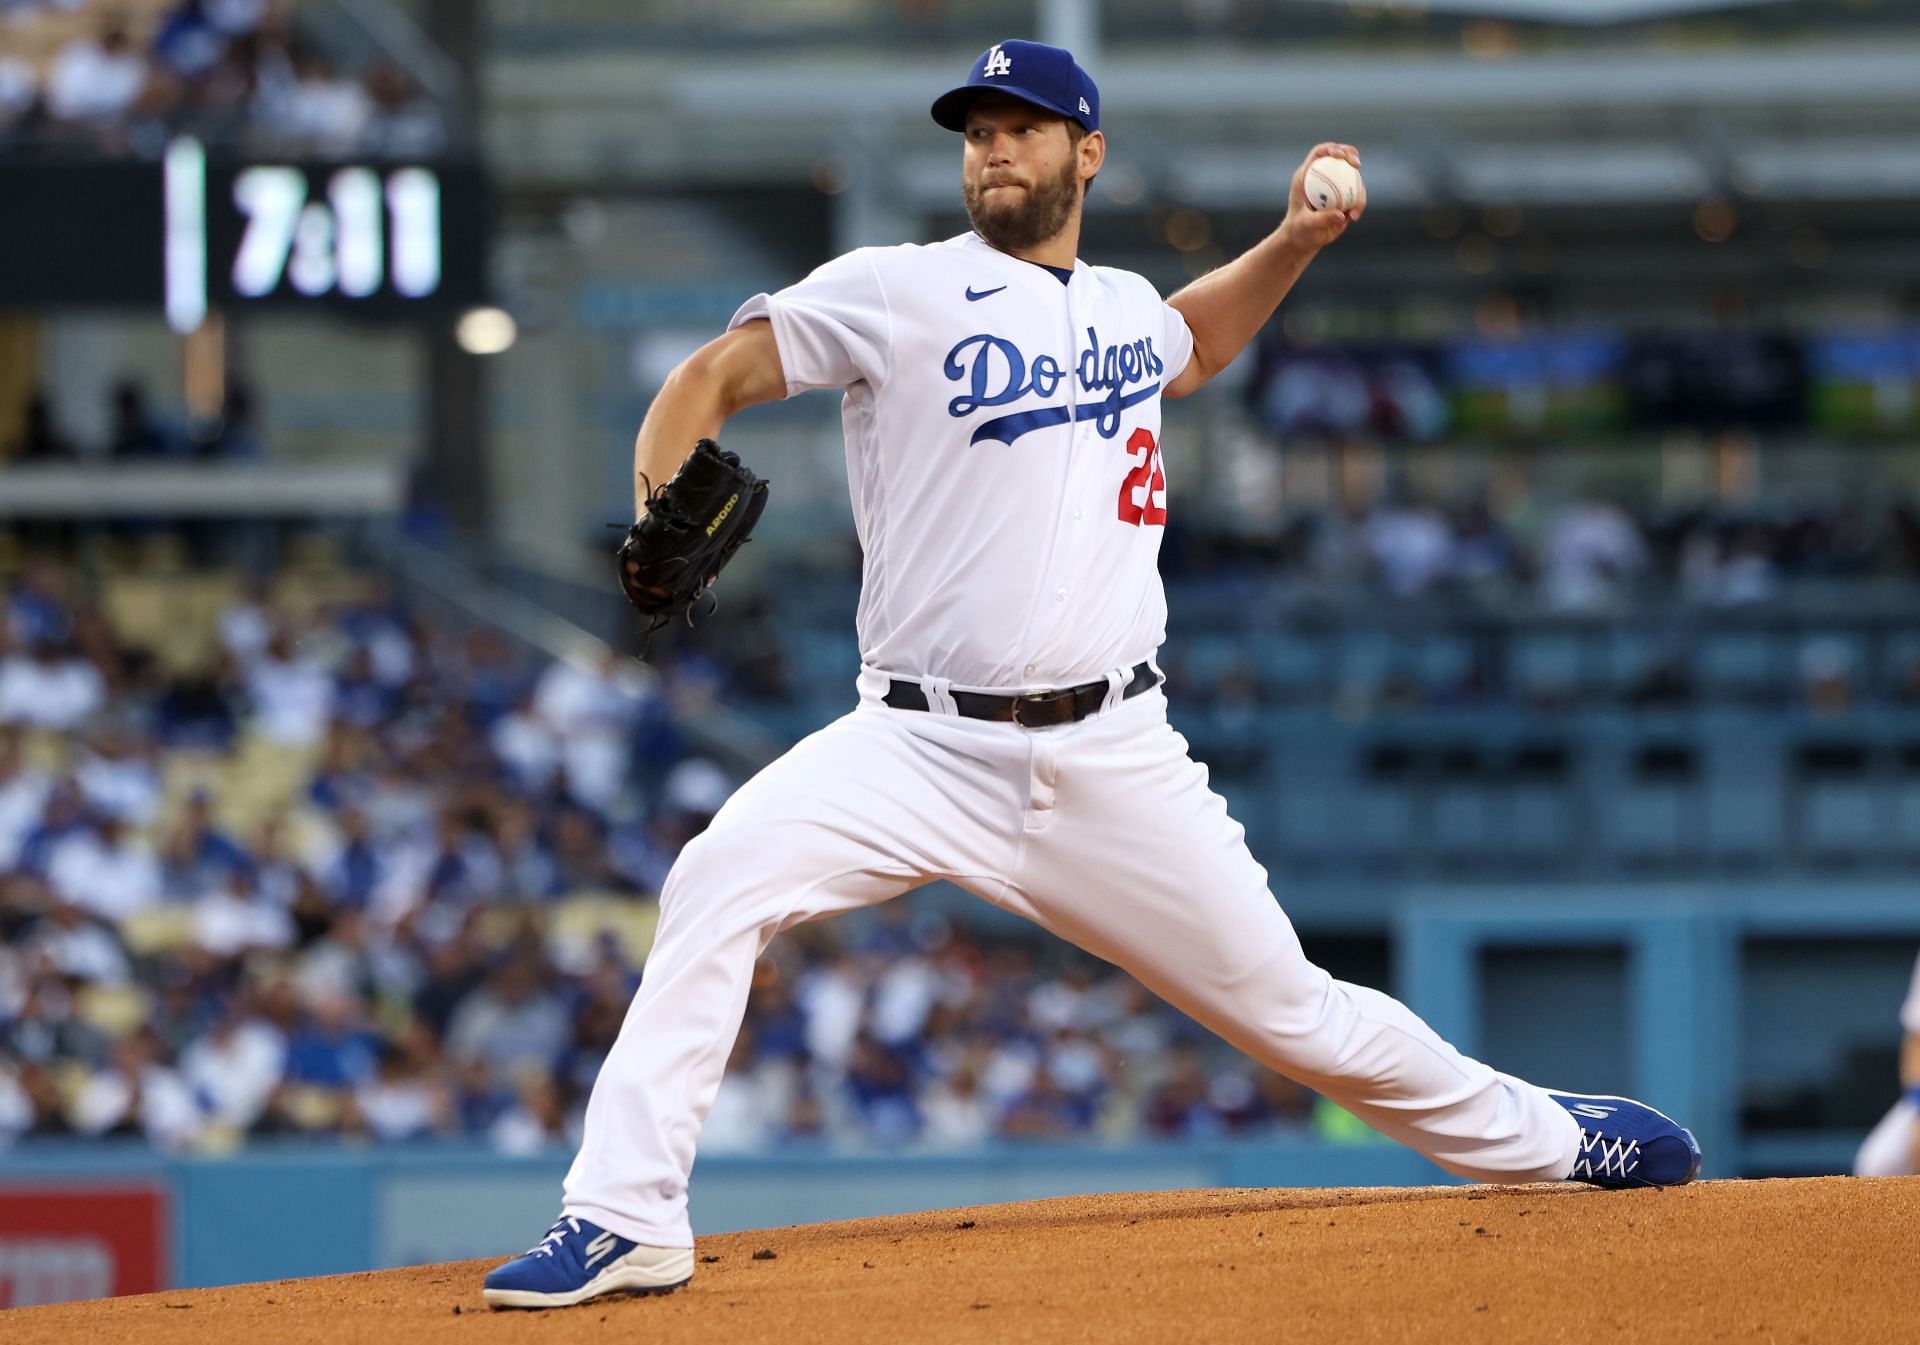 Clayton Kershaw of the Los Angeles Dodgers pitches during the first inning against the Detroit Tigers.